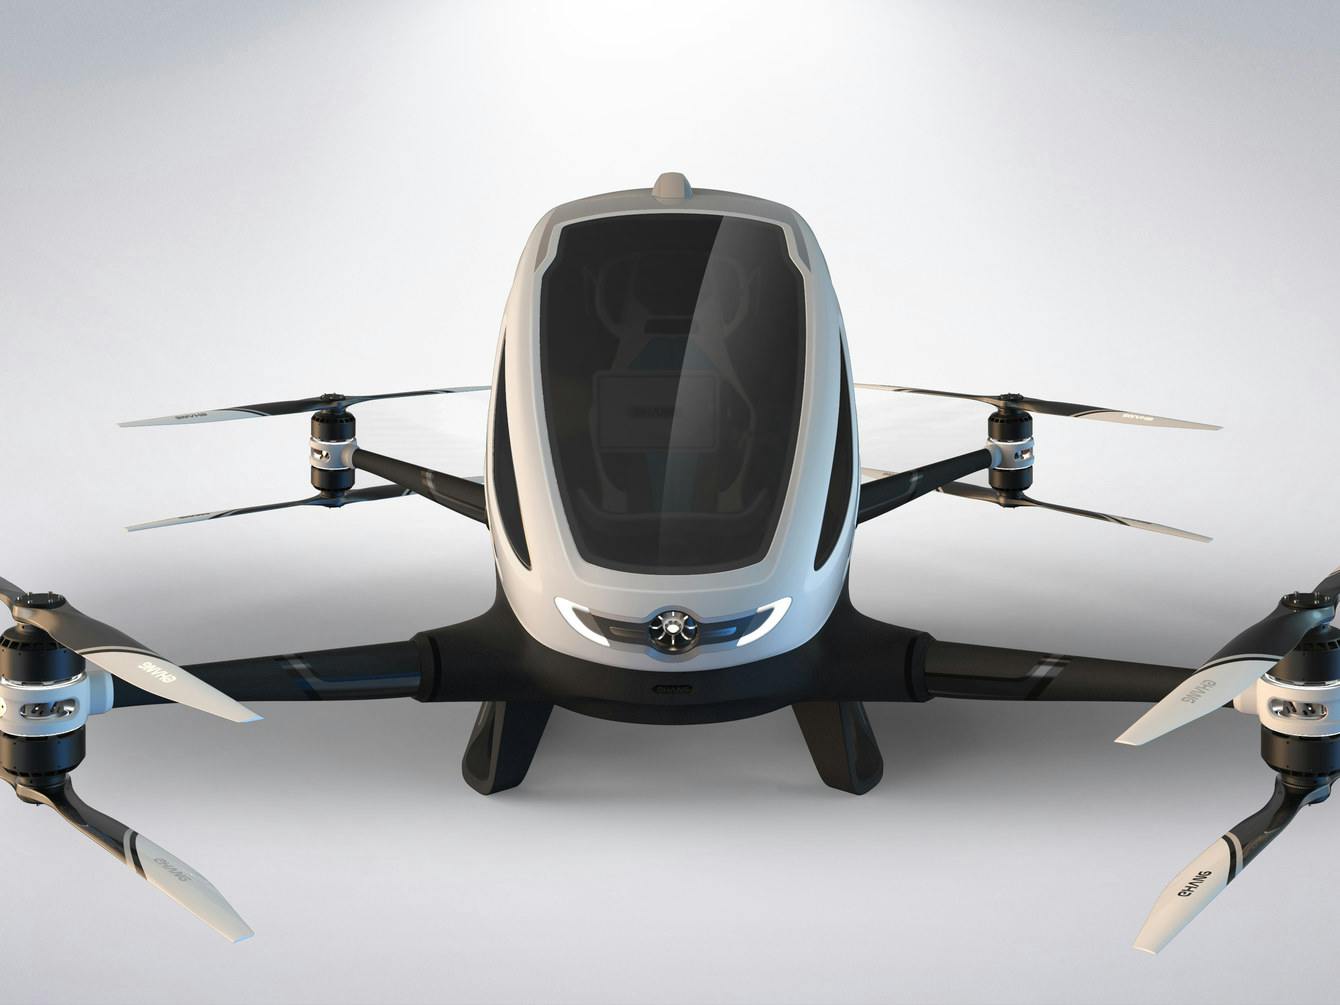 Unveiled ces 2016 drone could fly you to work!!